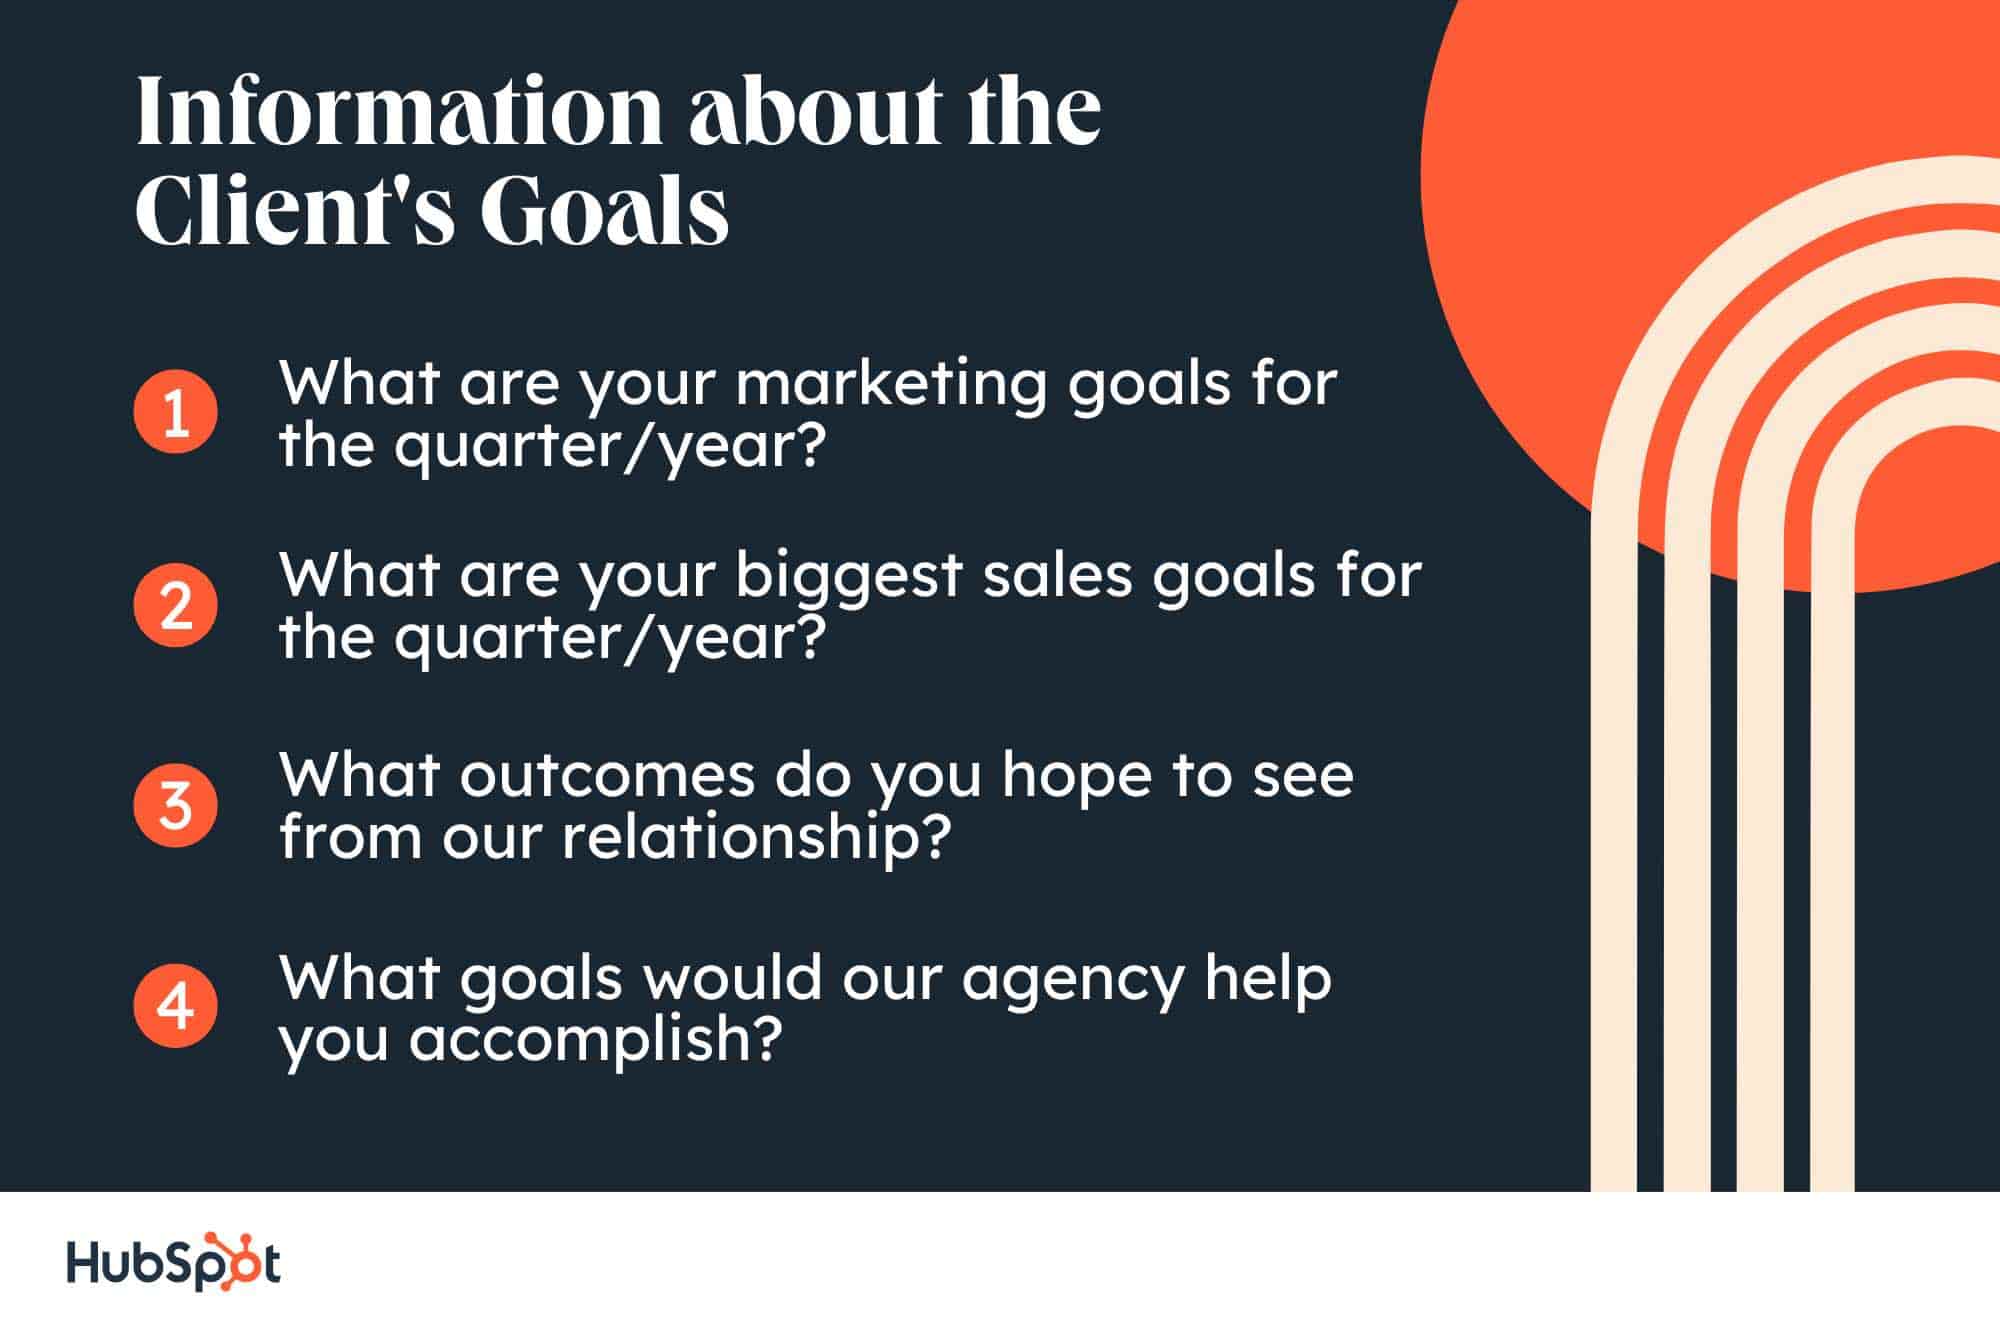 client intake form; Information about the Client's Goals. What are your marketing goals for the quarter/year? What are your biggest sales goals for the quarter/year? What outcomes do you hope to see from our relationship? What goals would our agency help you accomplish?